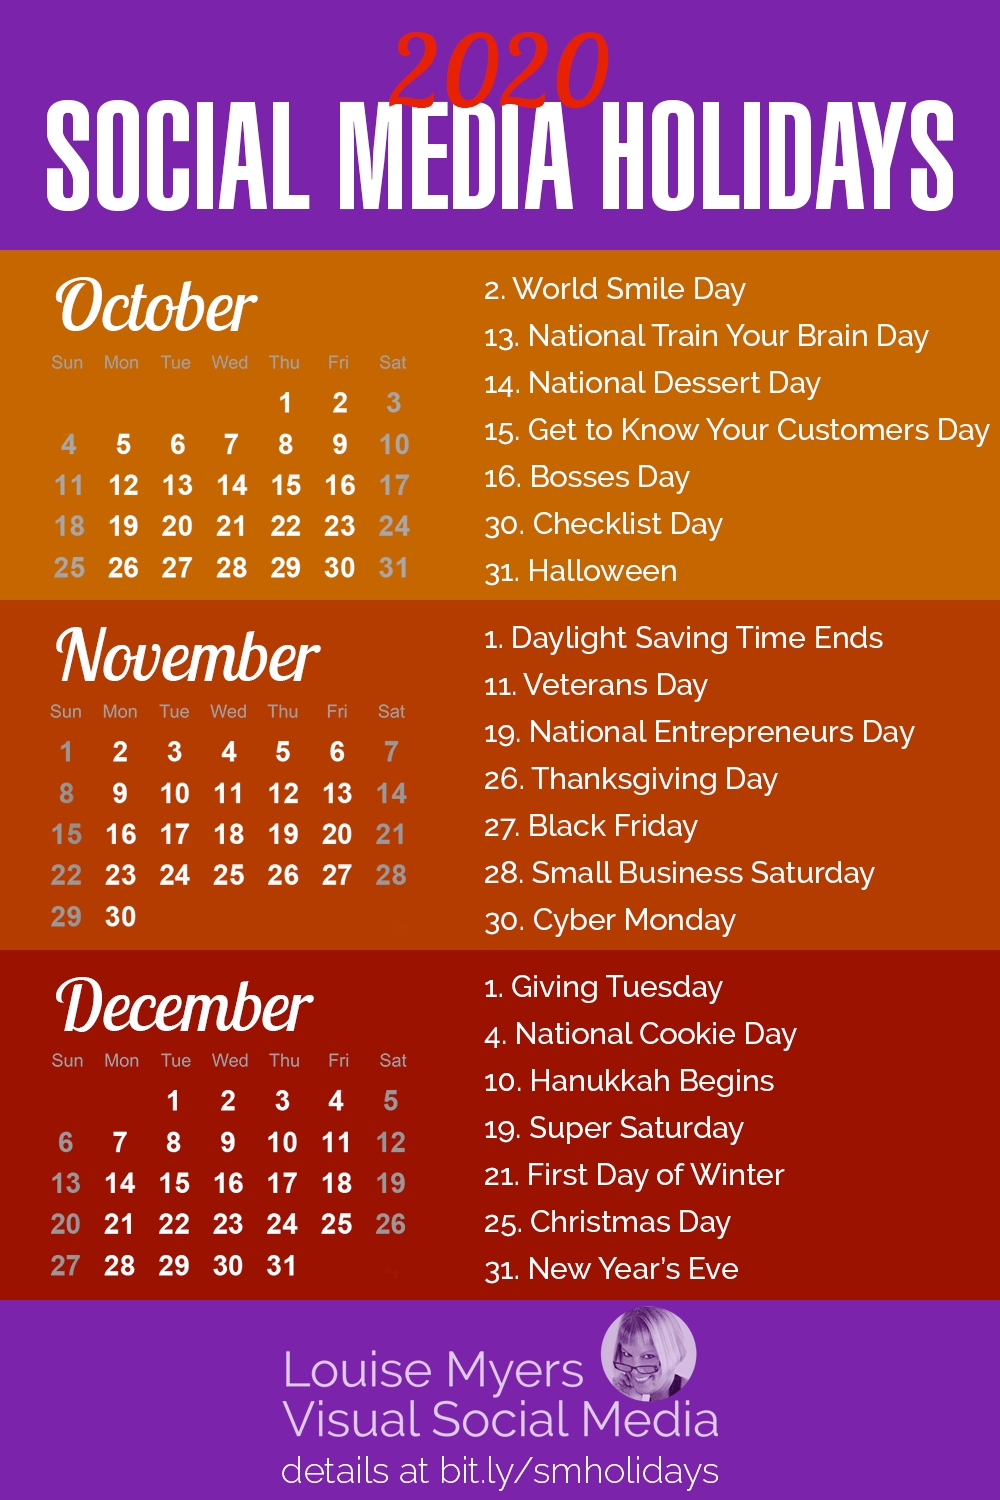 84 Social Media Holidays You Need In 2020: Indispensable! 2020 Calendar Important Dates